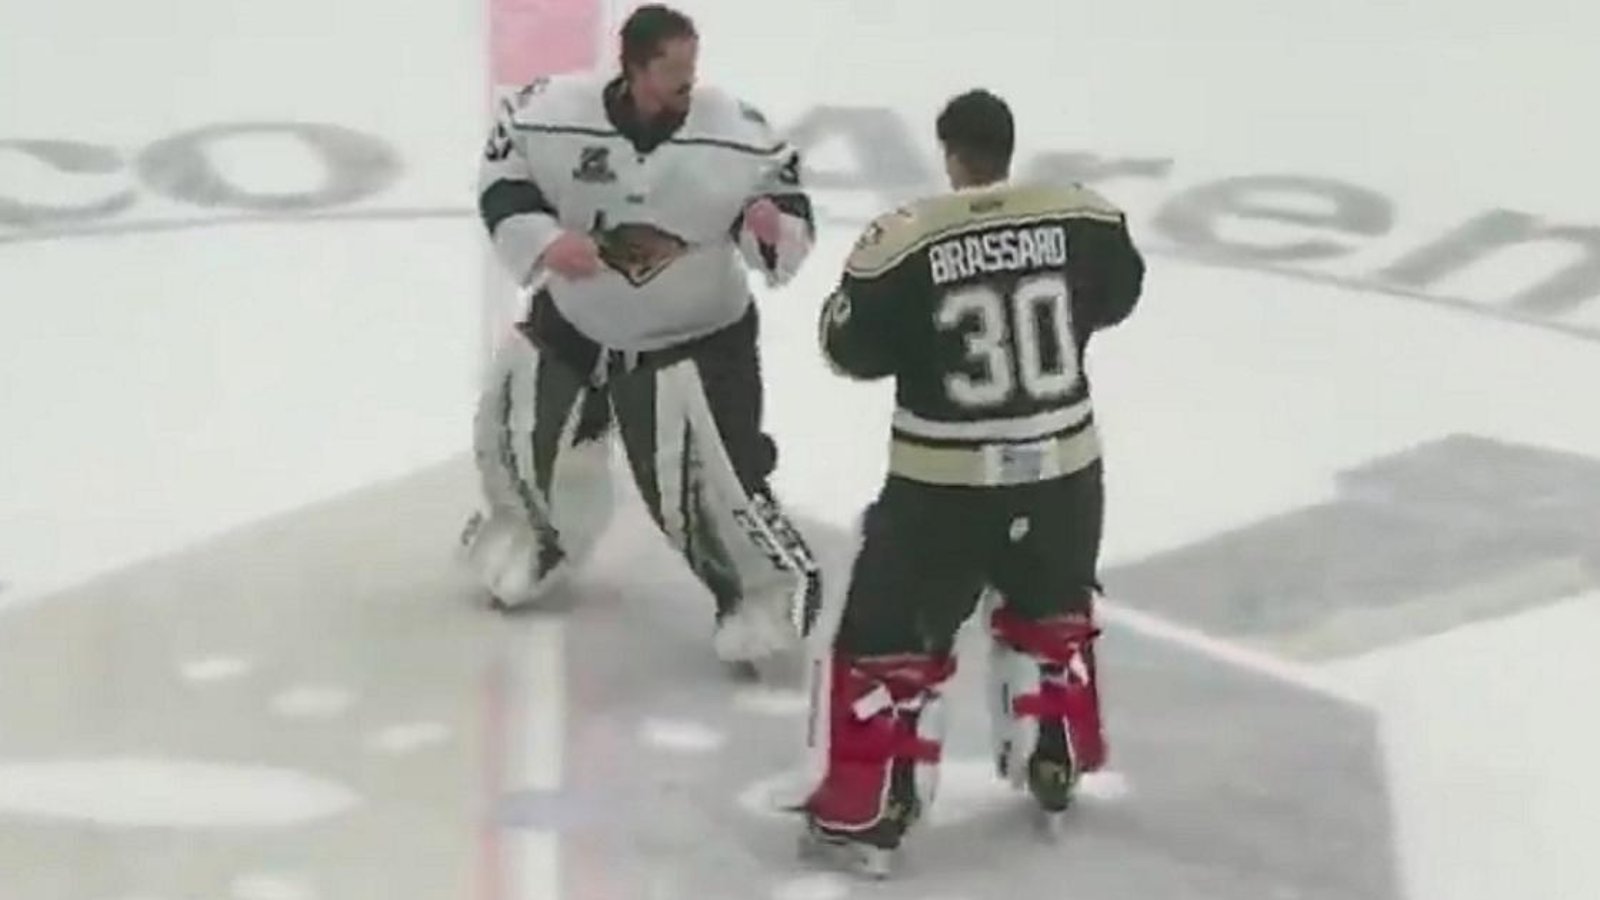 Goalie fight breaks out at center ice after a crazy brawl in the ECHL!